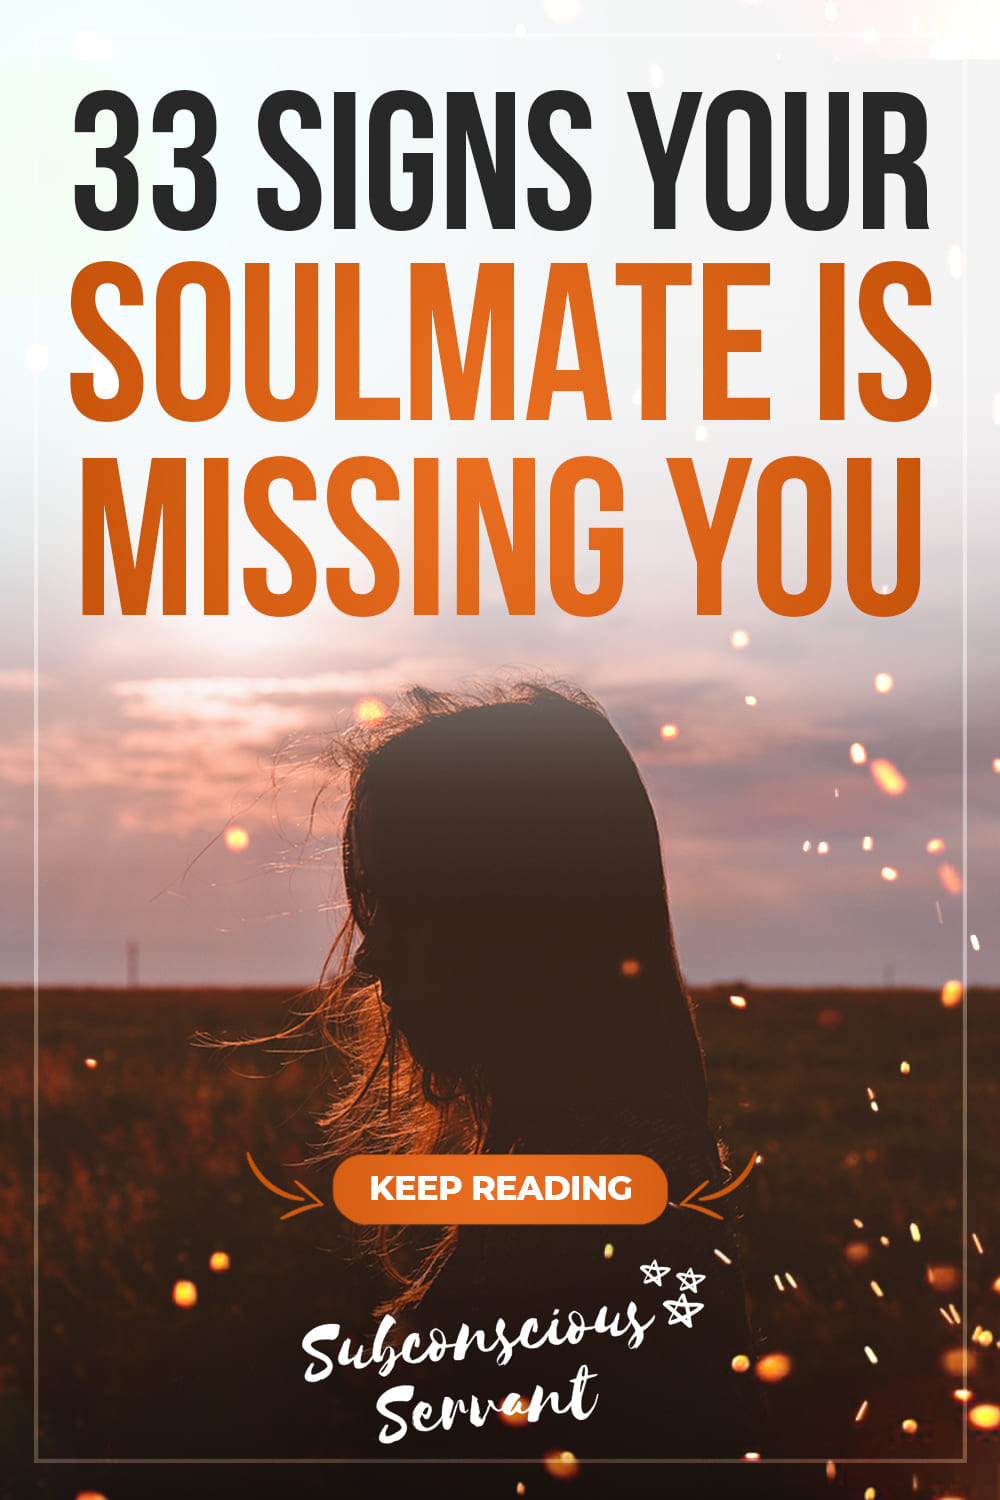 33 Signs Your Soulmate Is Missing You